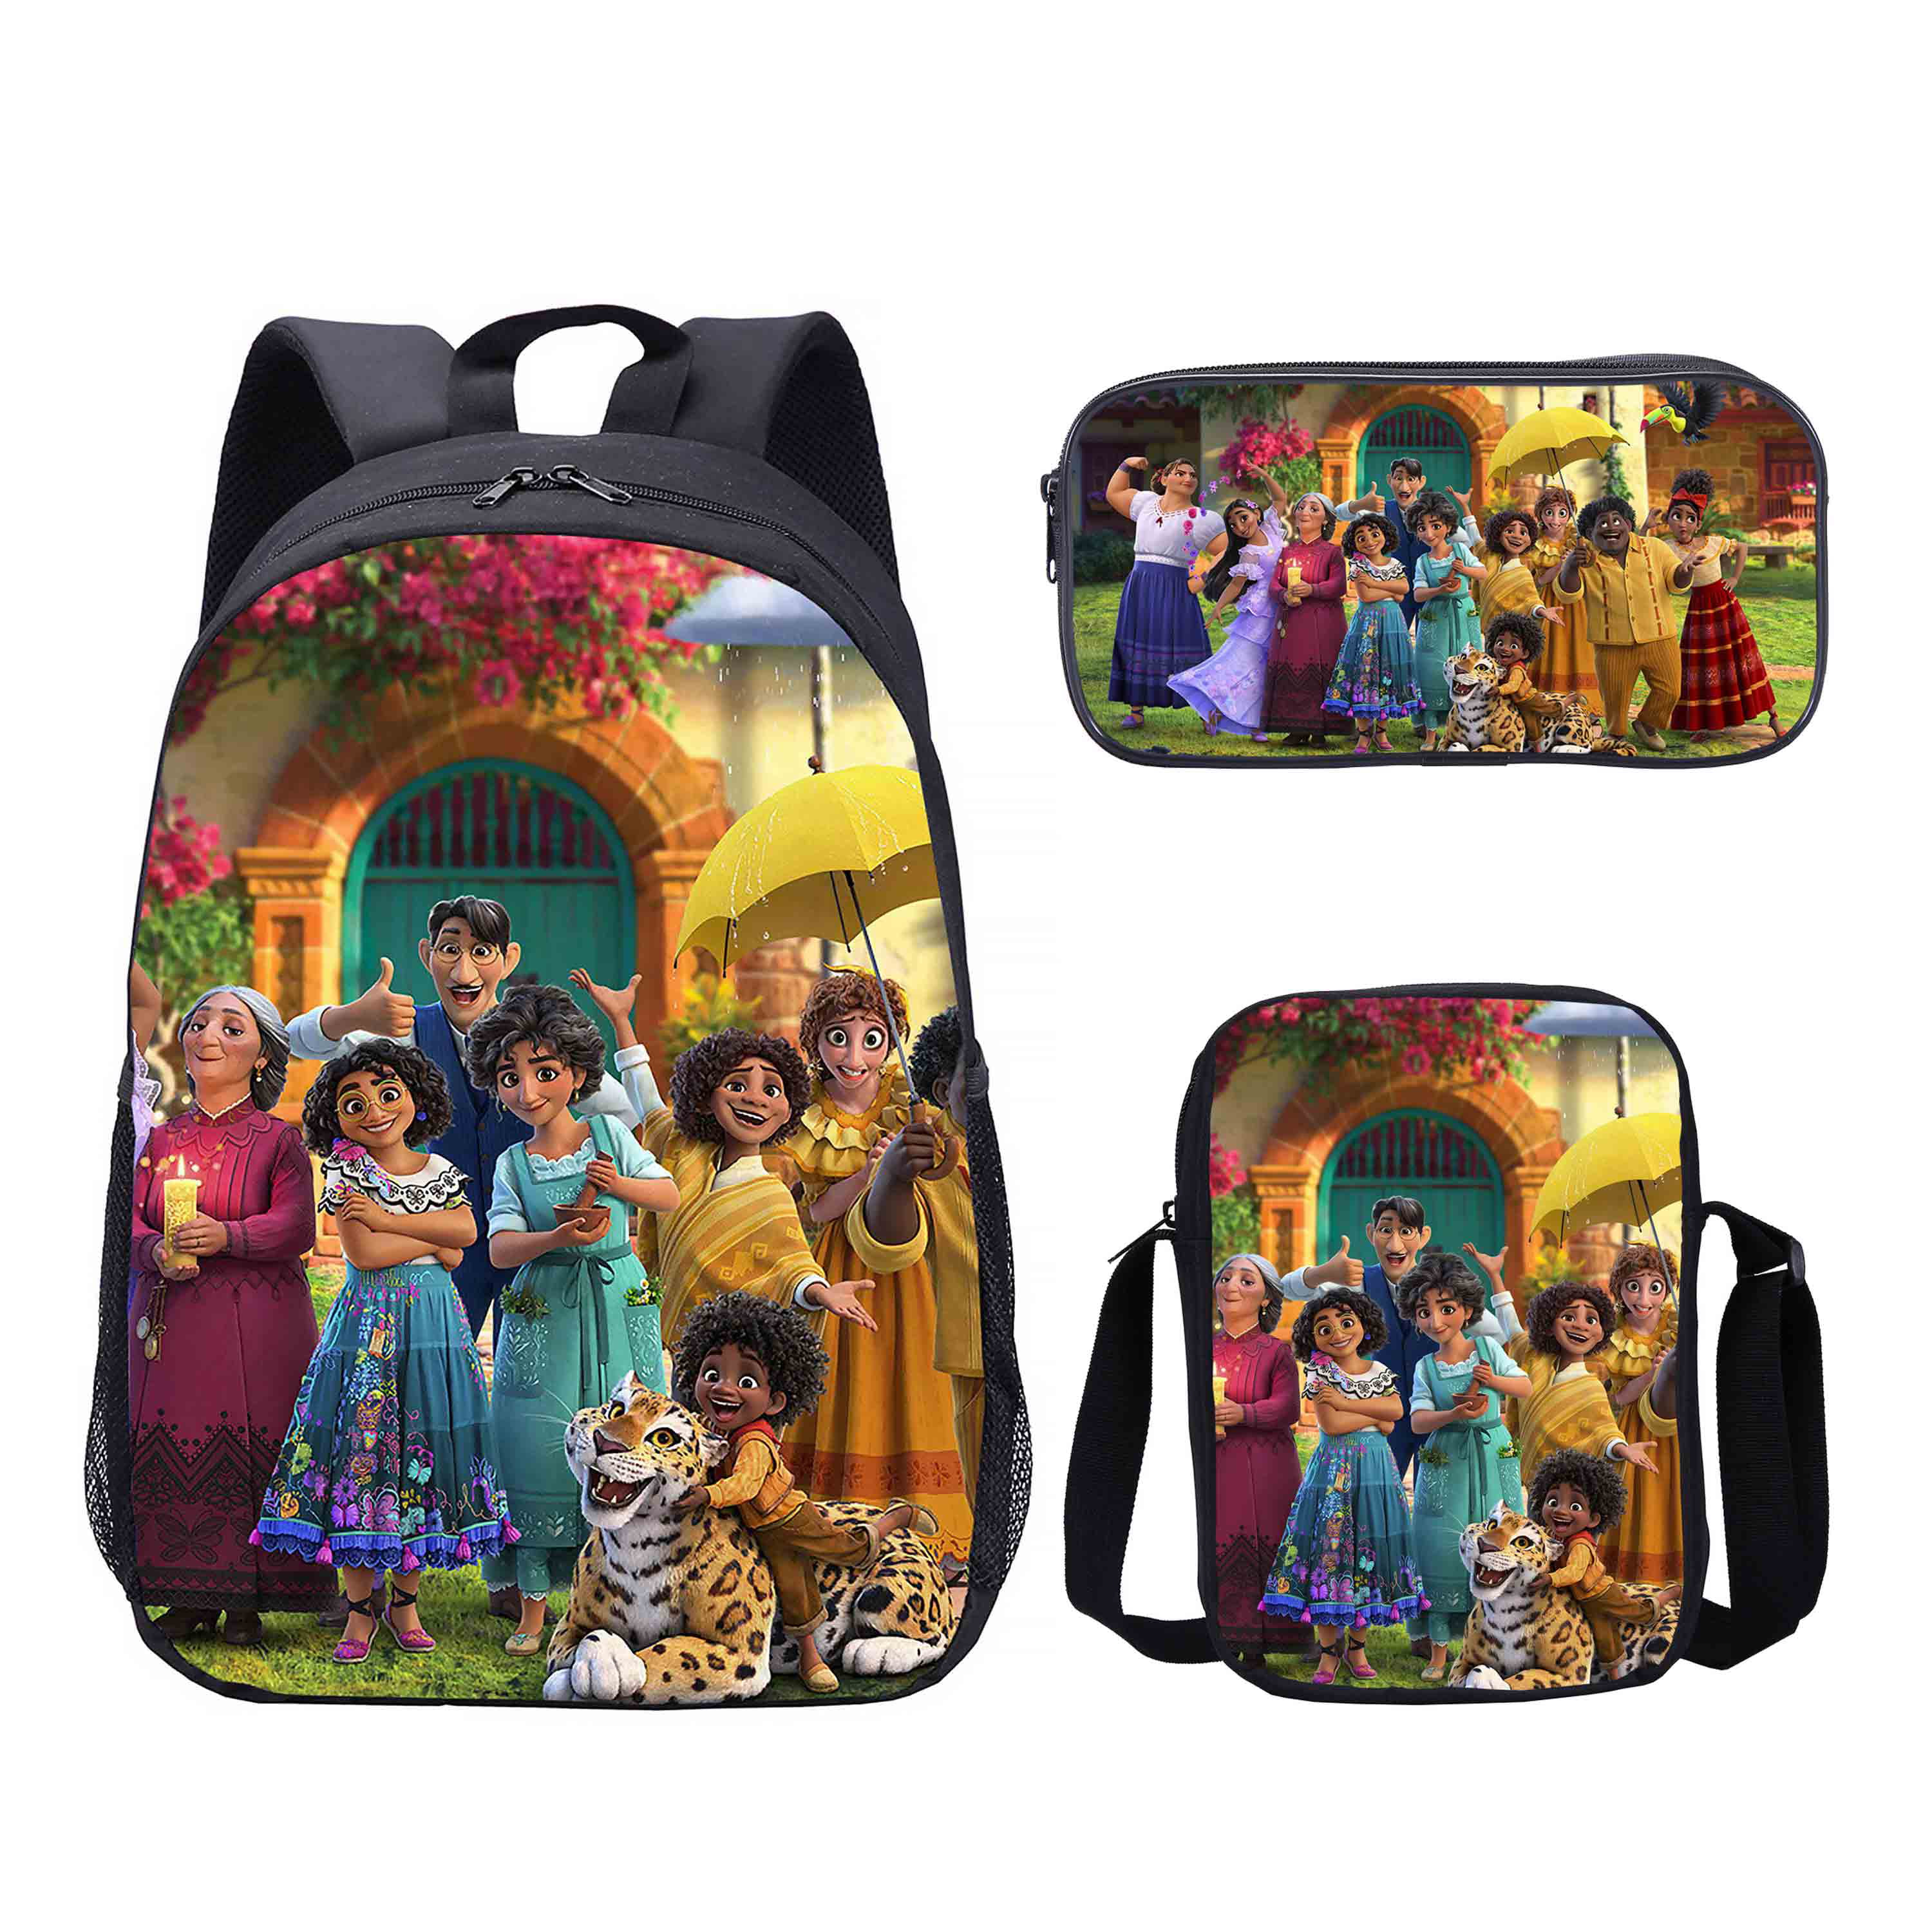 Encanto 3 Different Size Image Customized Backpack Storage Schoolbag Girls 